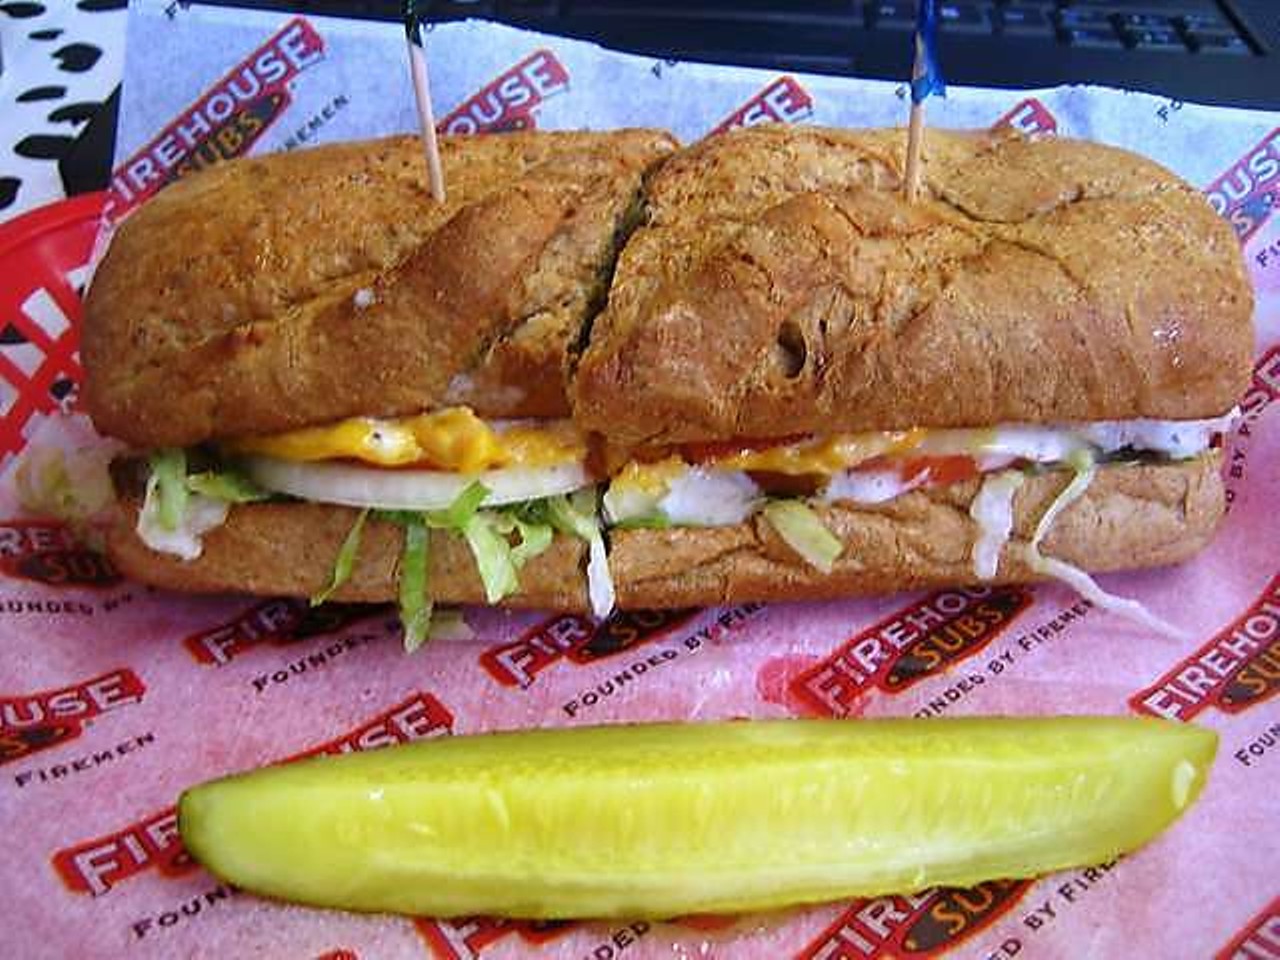 Show your ID to get a free sub at Firehouse Subs on your birthday.